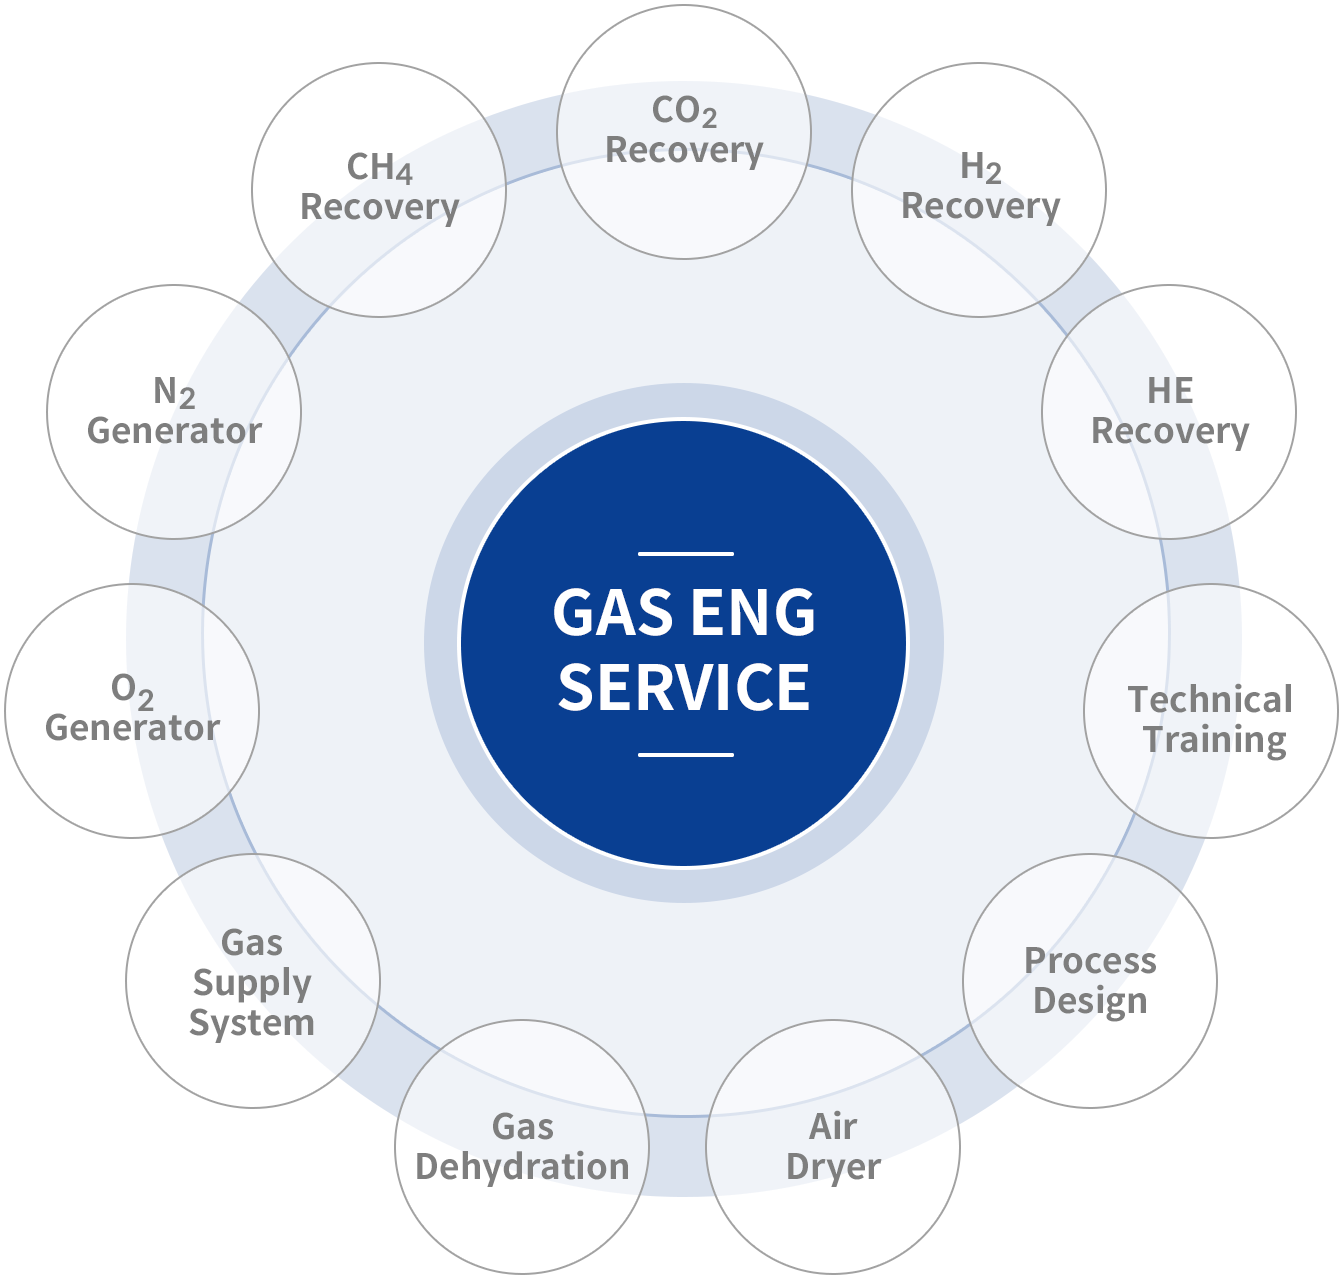 ASPE Inc. is a company that specialized in Gas engineering service and nitrogen generator with hydrogen plant.